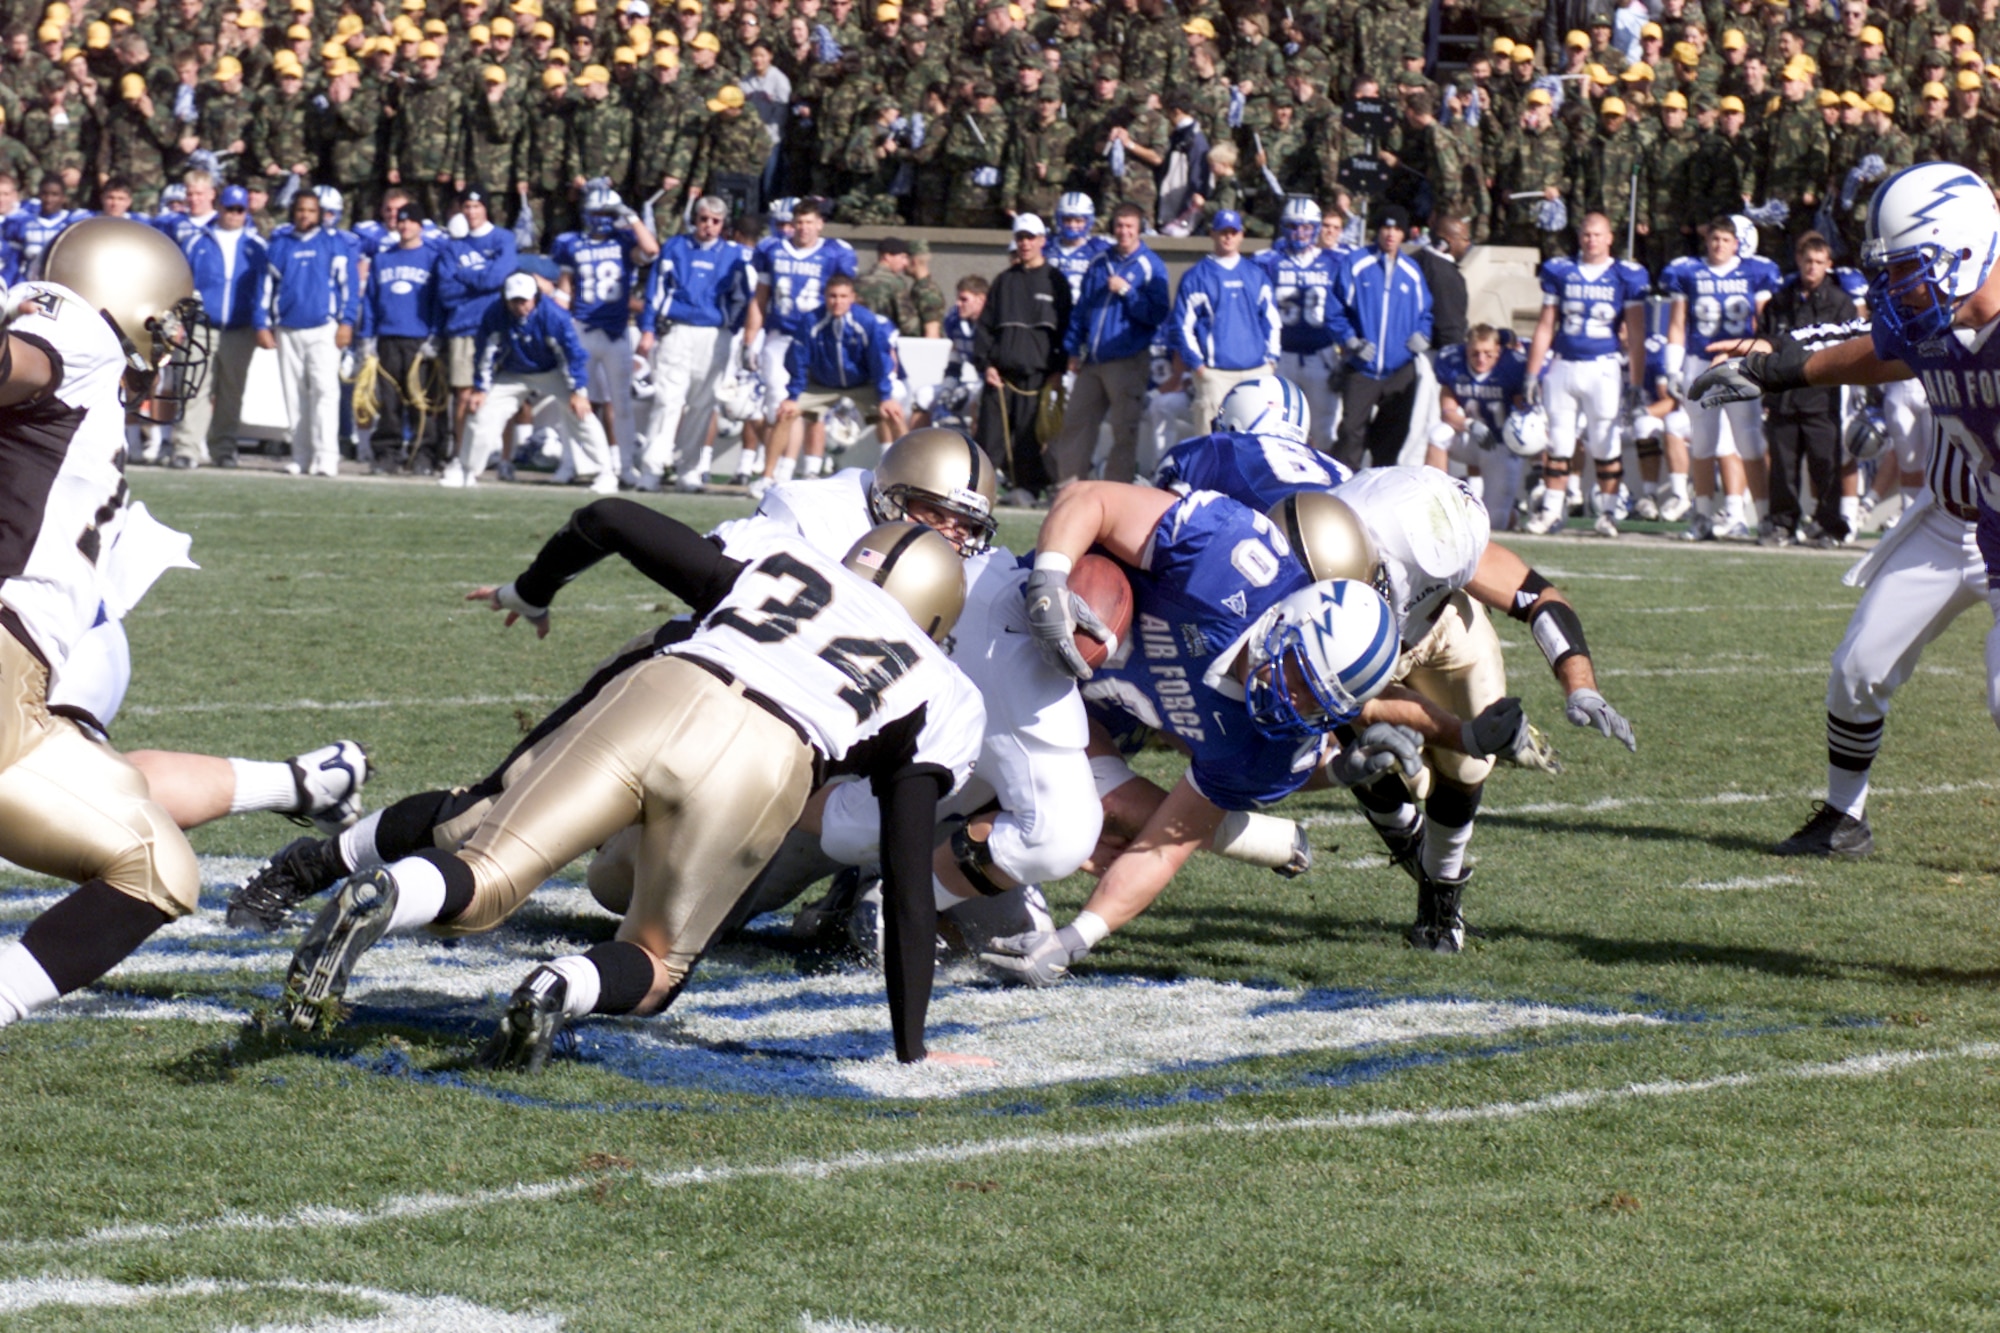 Football Air Force Academy's 2007 schedule released > Air Force